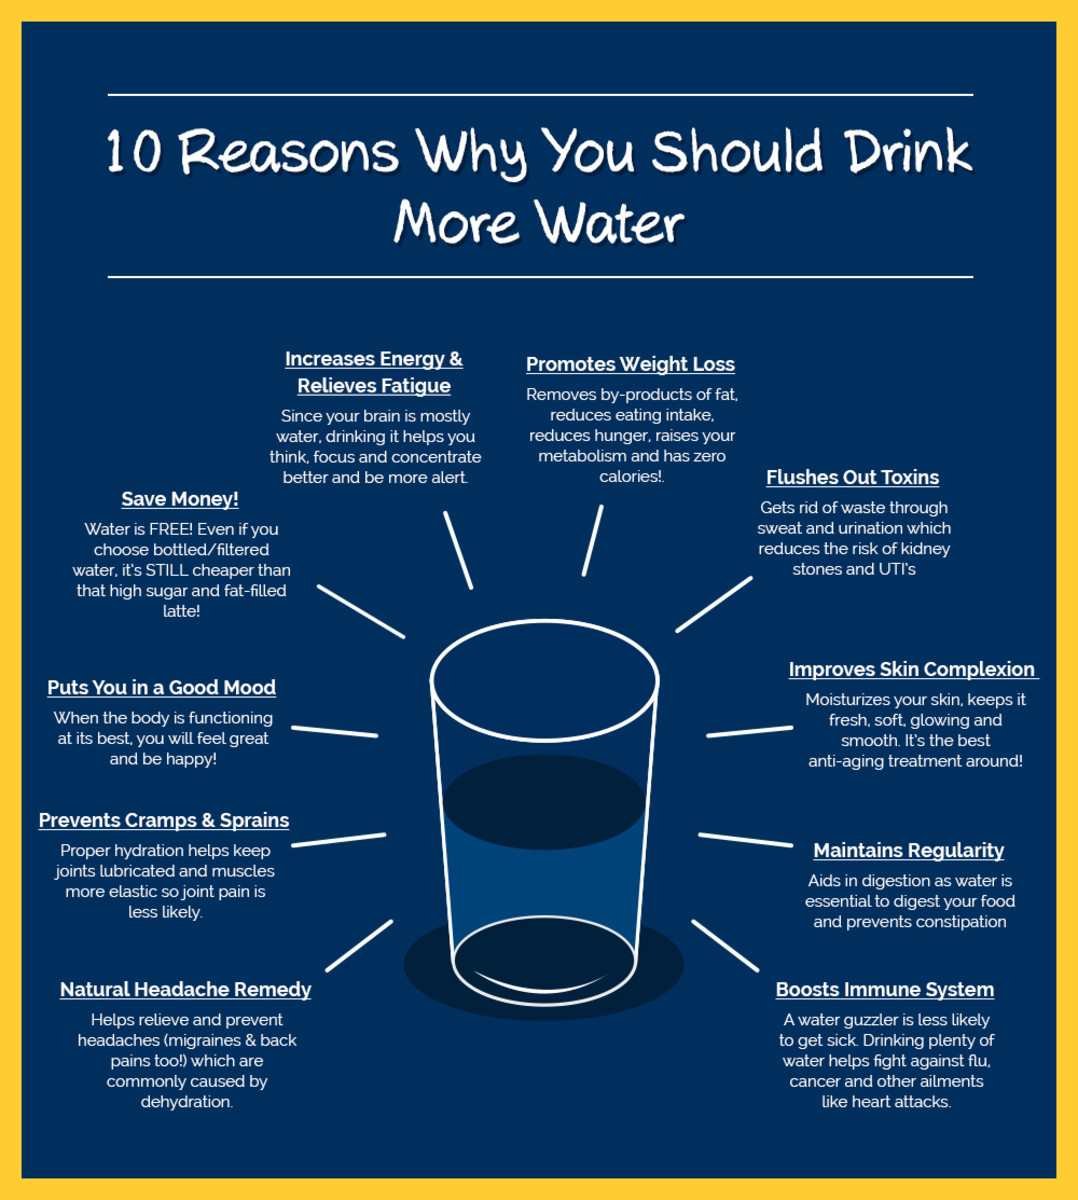 10 Reasons to Drink More Water